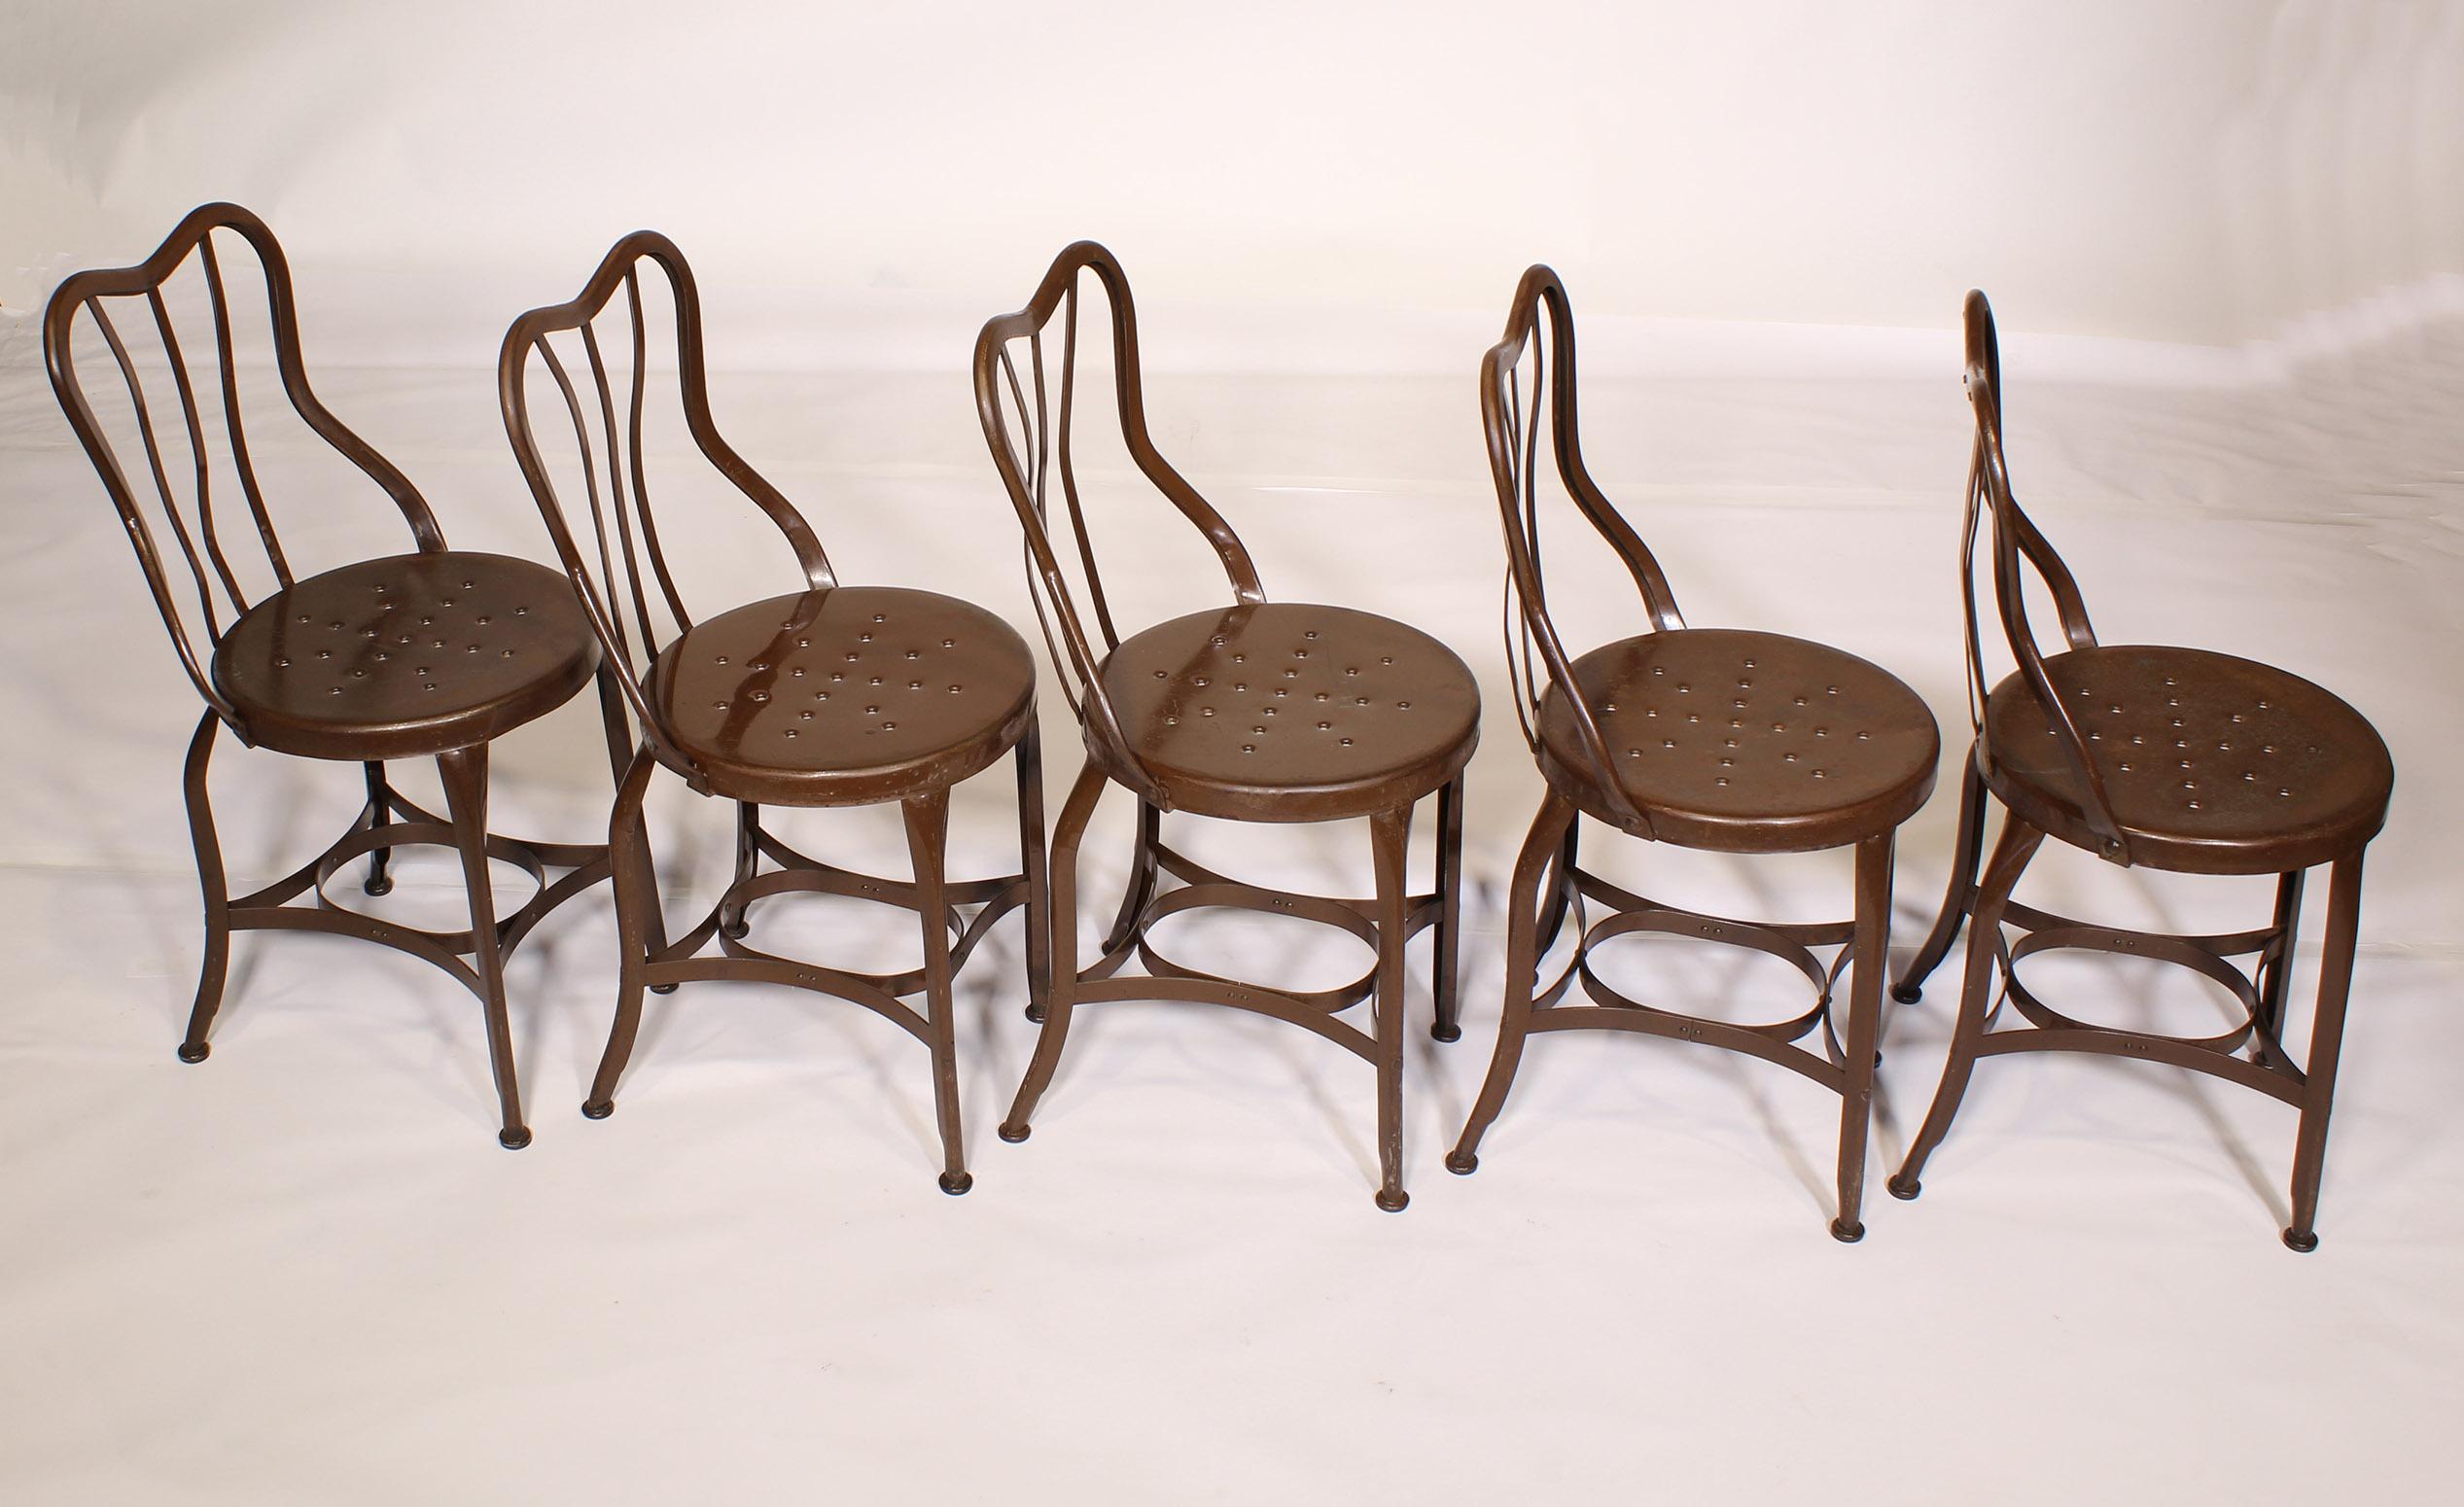 American Set of 5 Antique Metal Cafe Chairs by Toledo